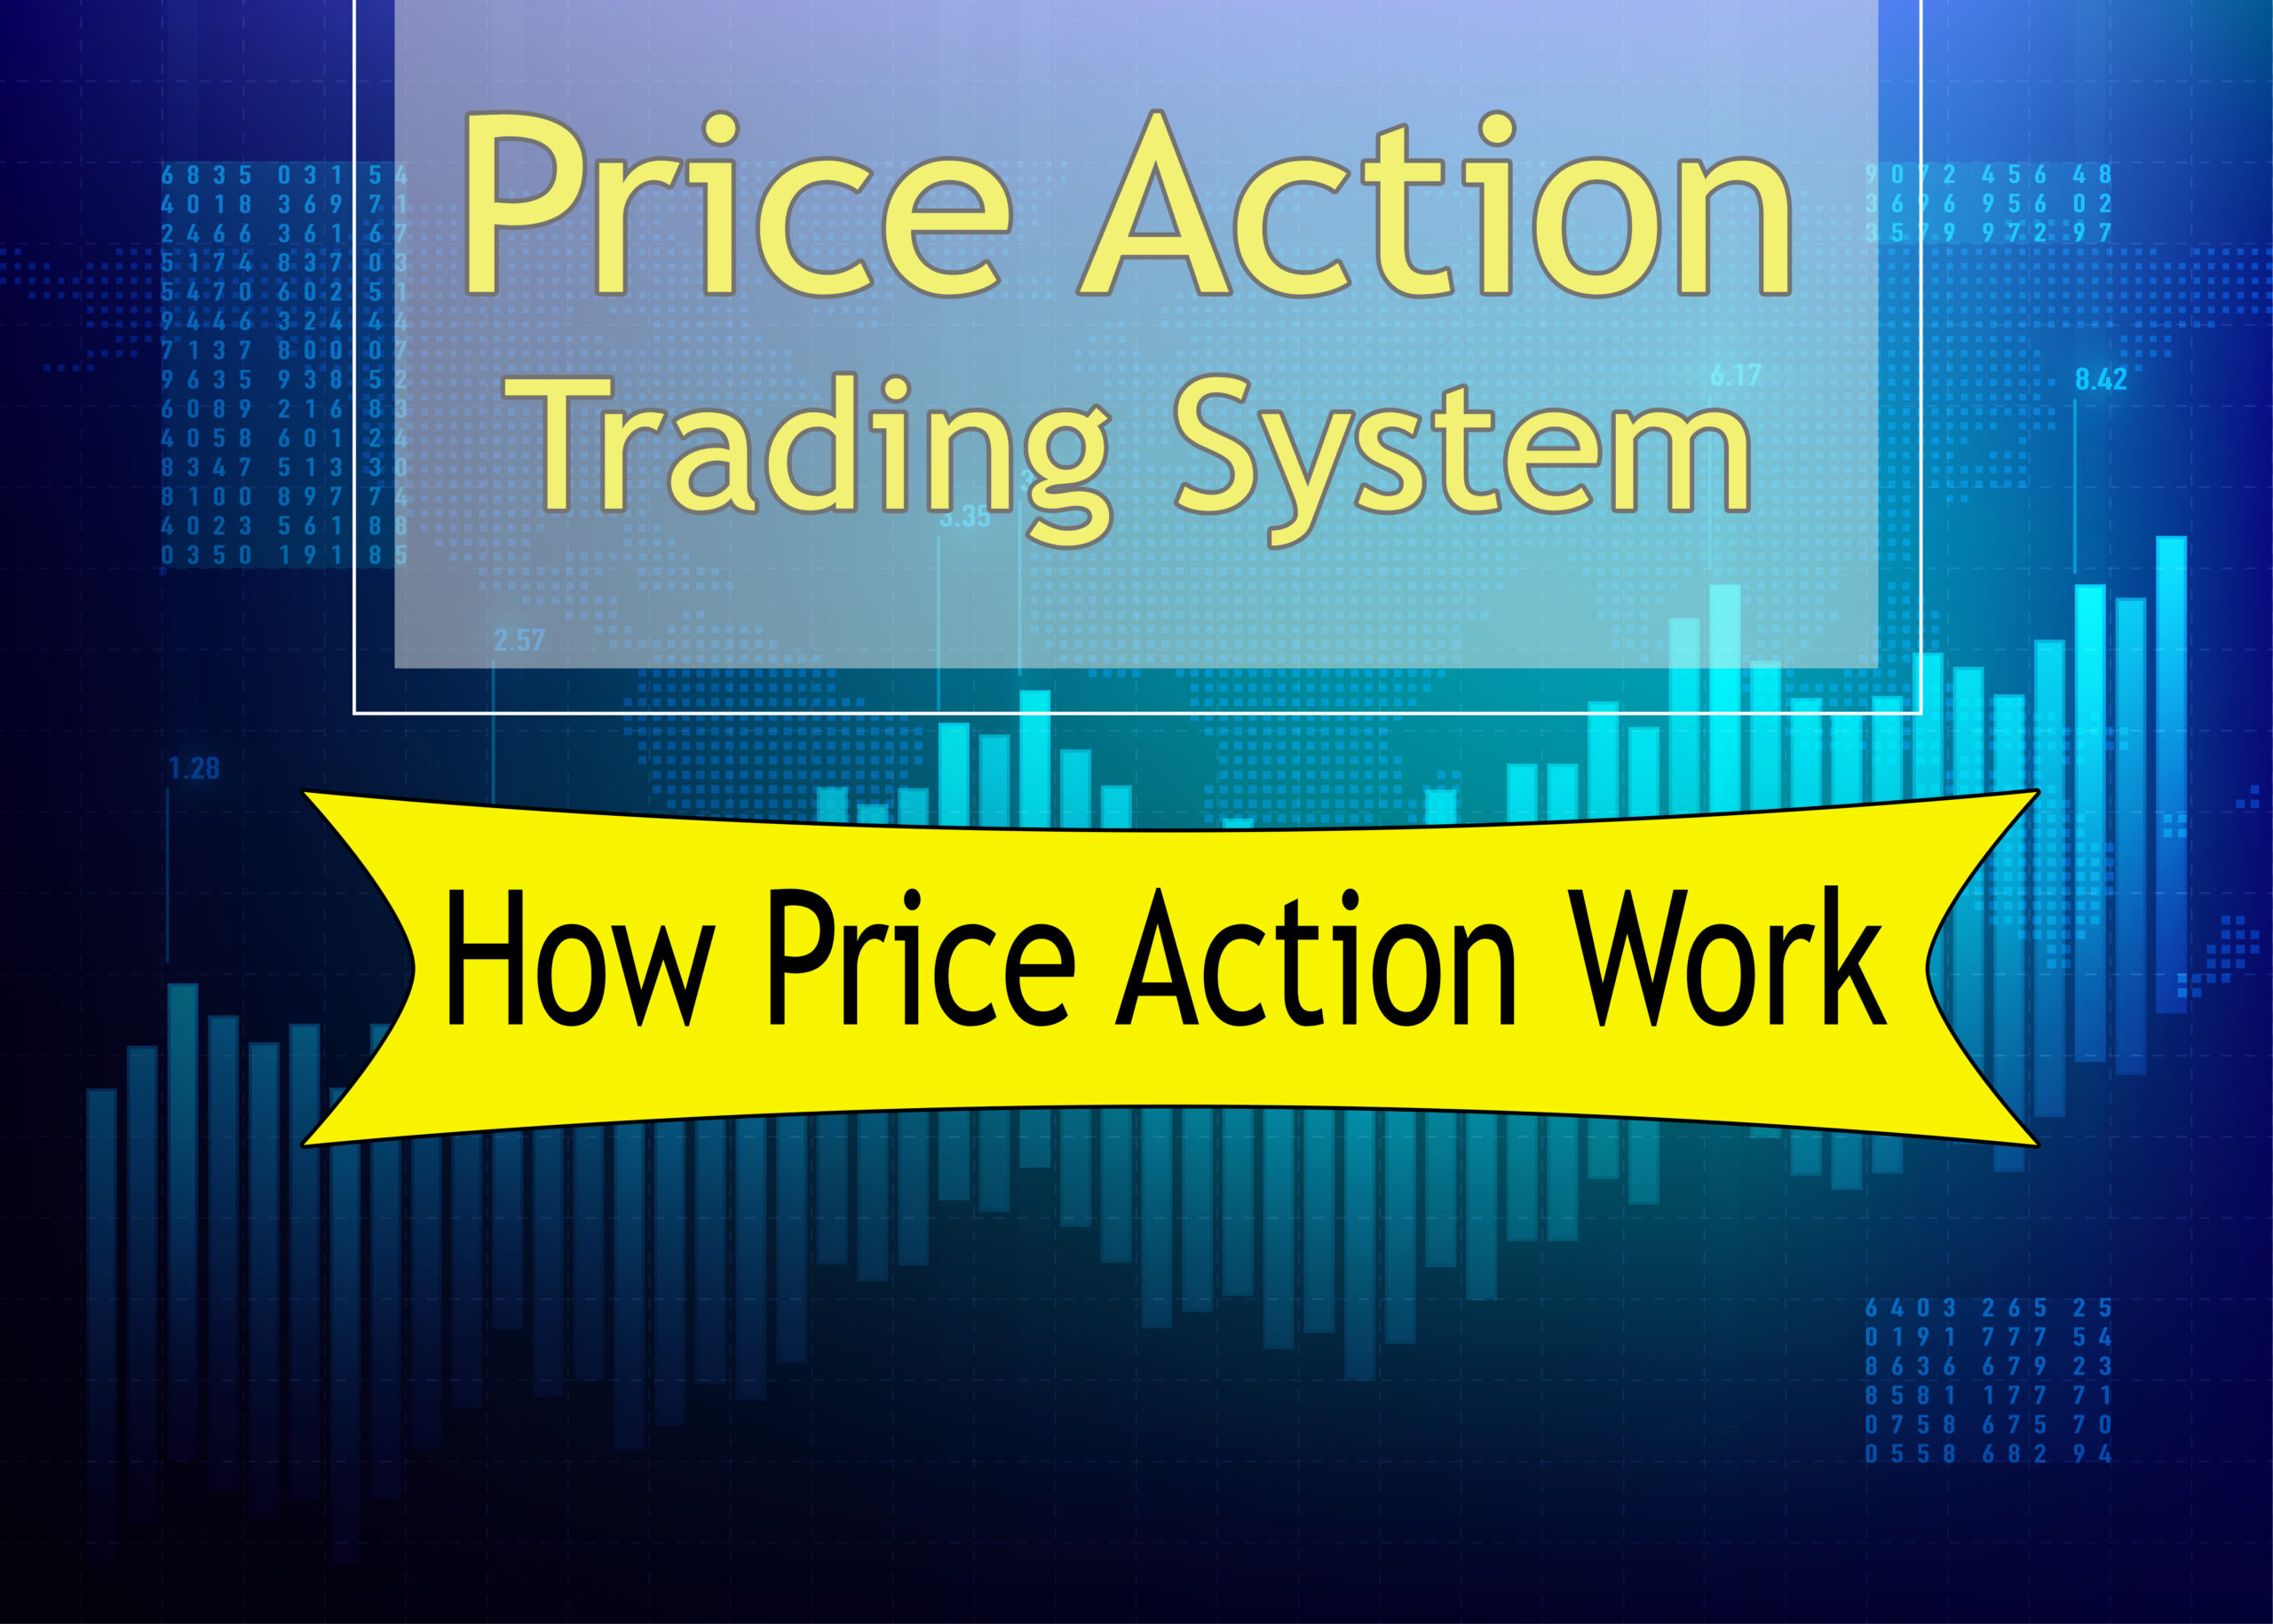 Price Action Trading System